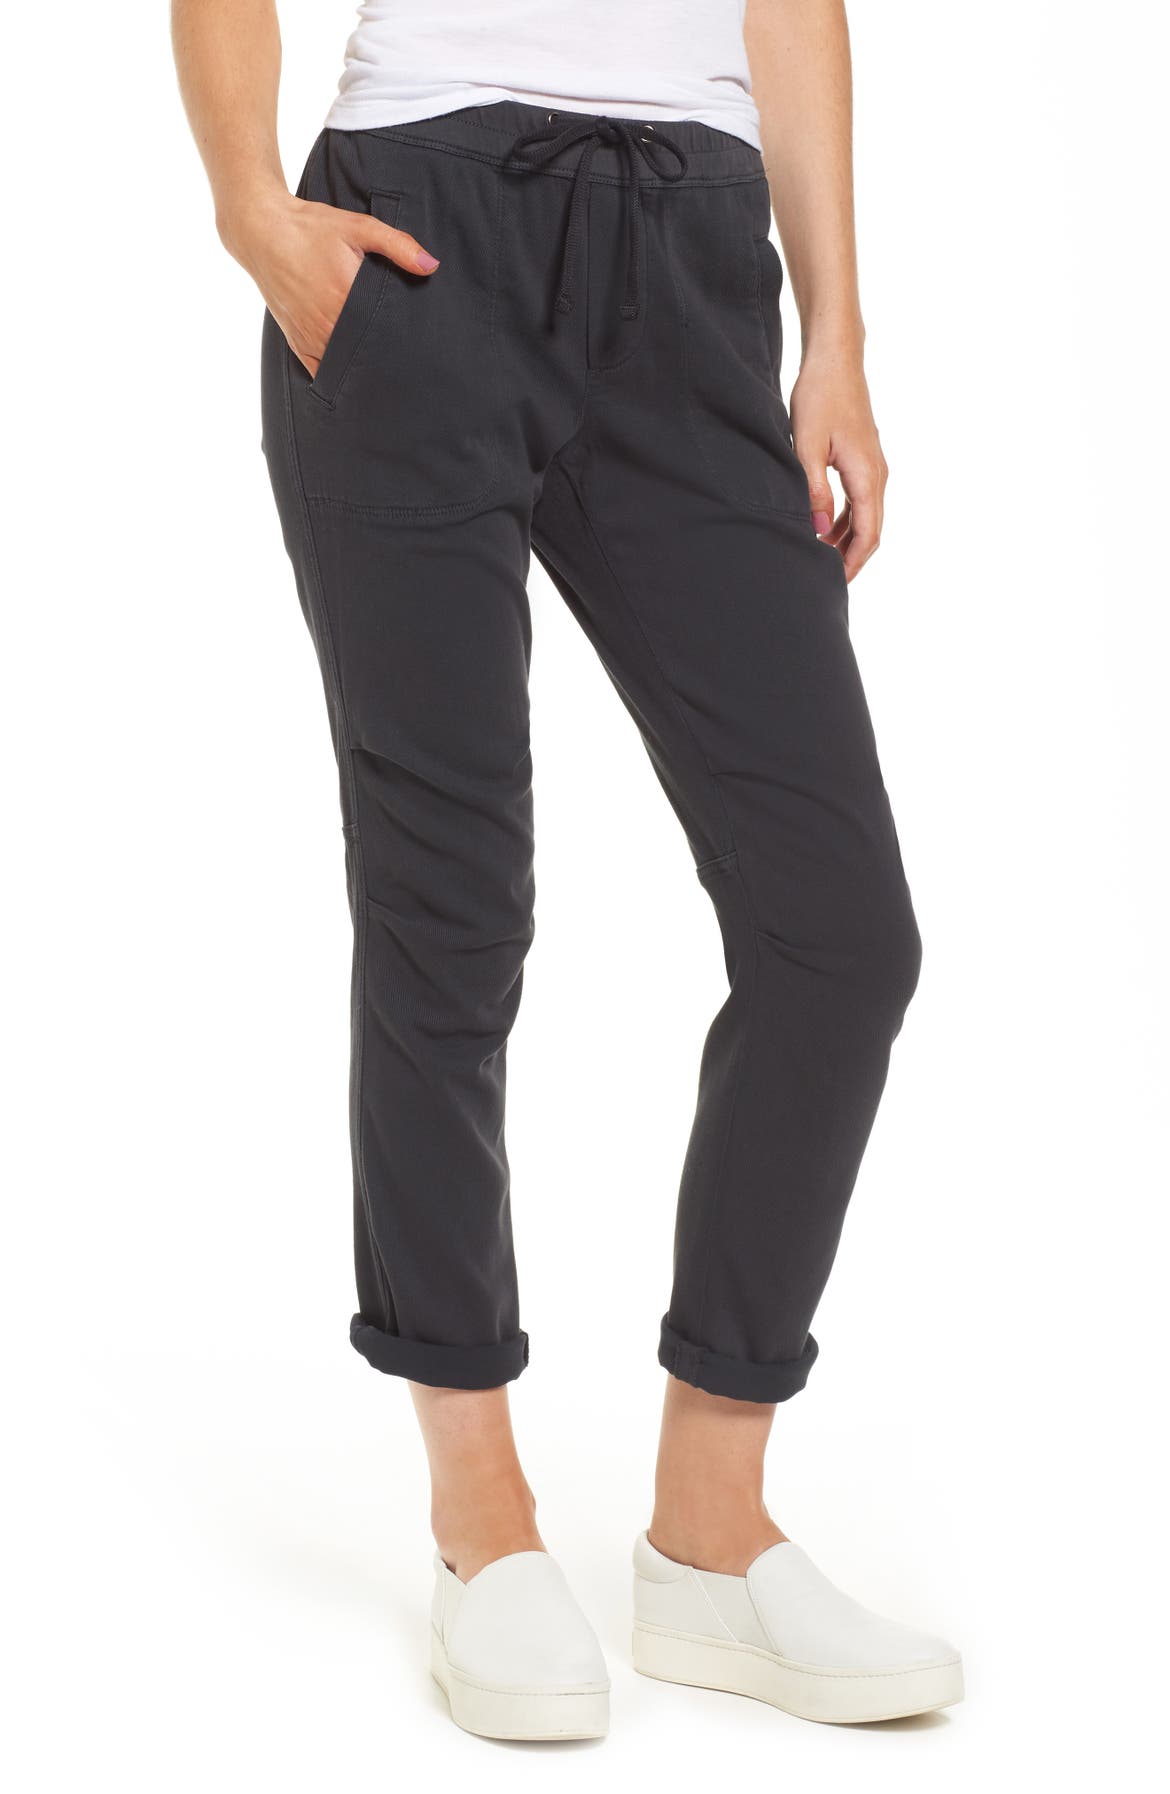 James Perse Utility Pants | Nordstrom